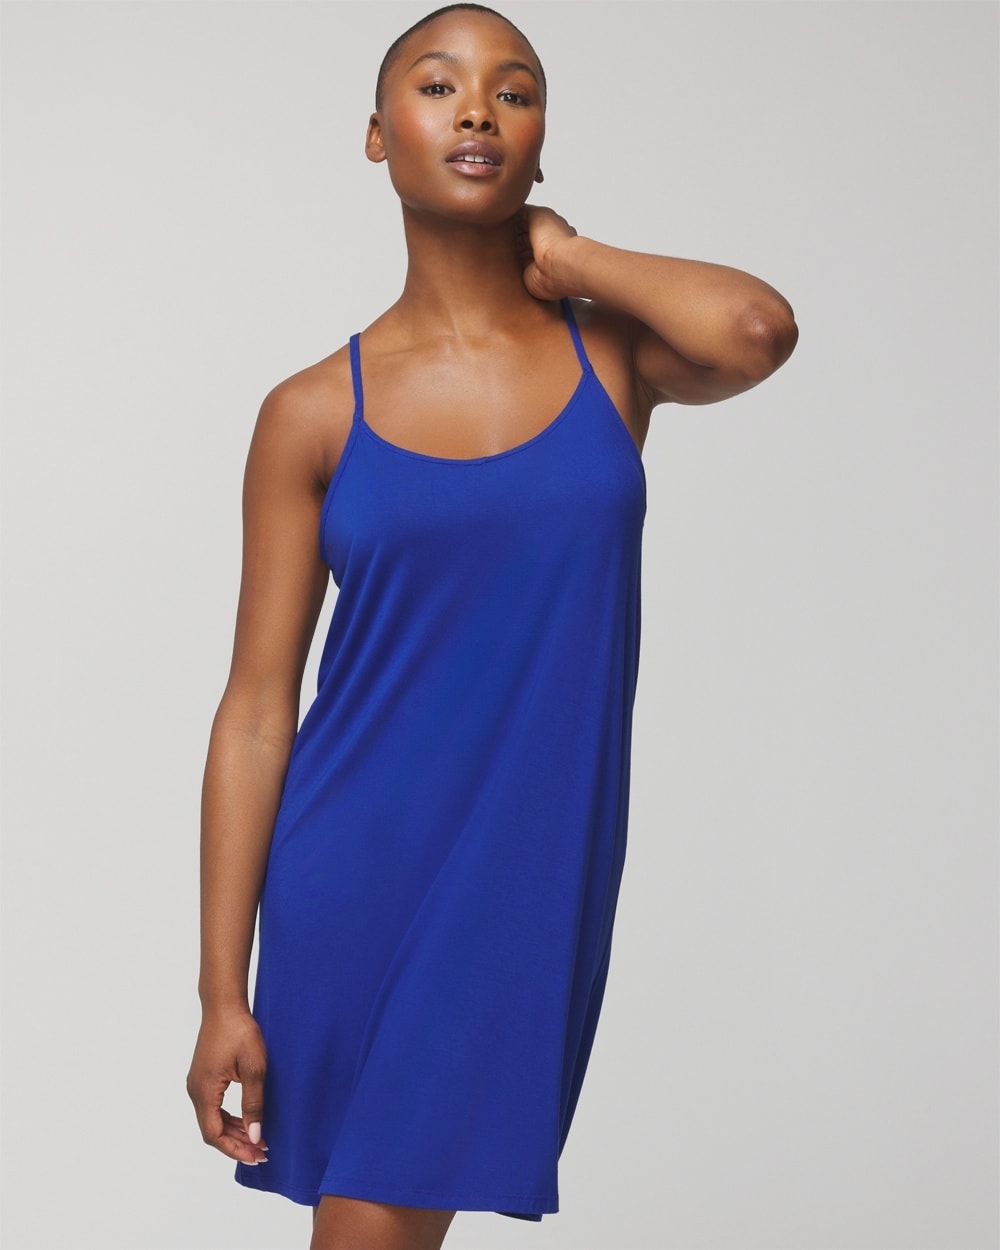 SOMA WOMEN'S COOL NIGHTS STRAPPY NIGHT GOWN IN ROYAL BLUE SIZE XL | SOMA